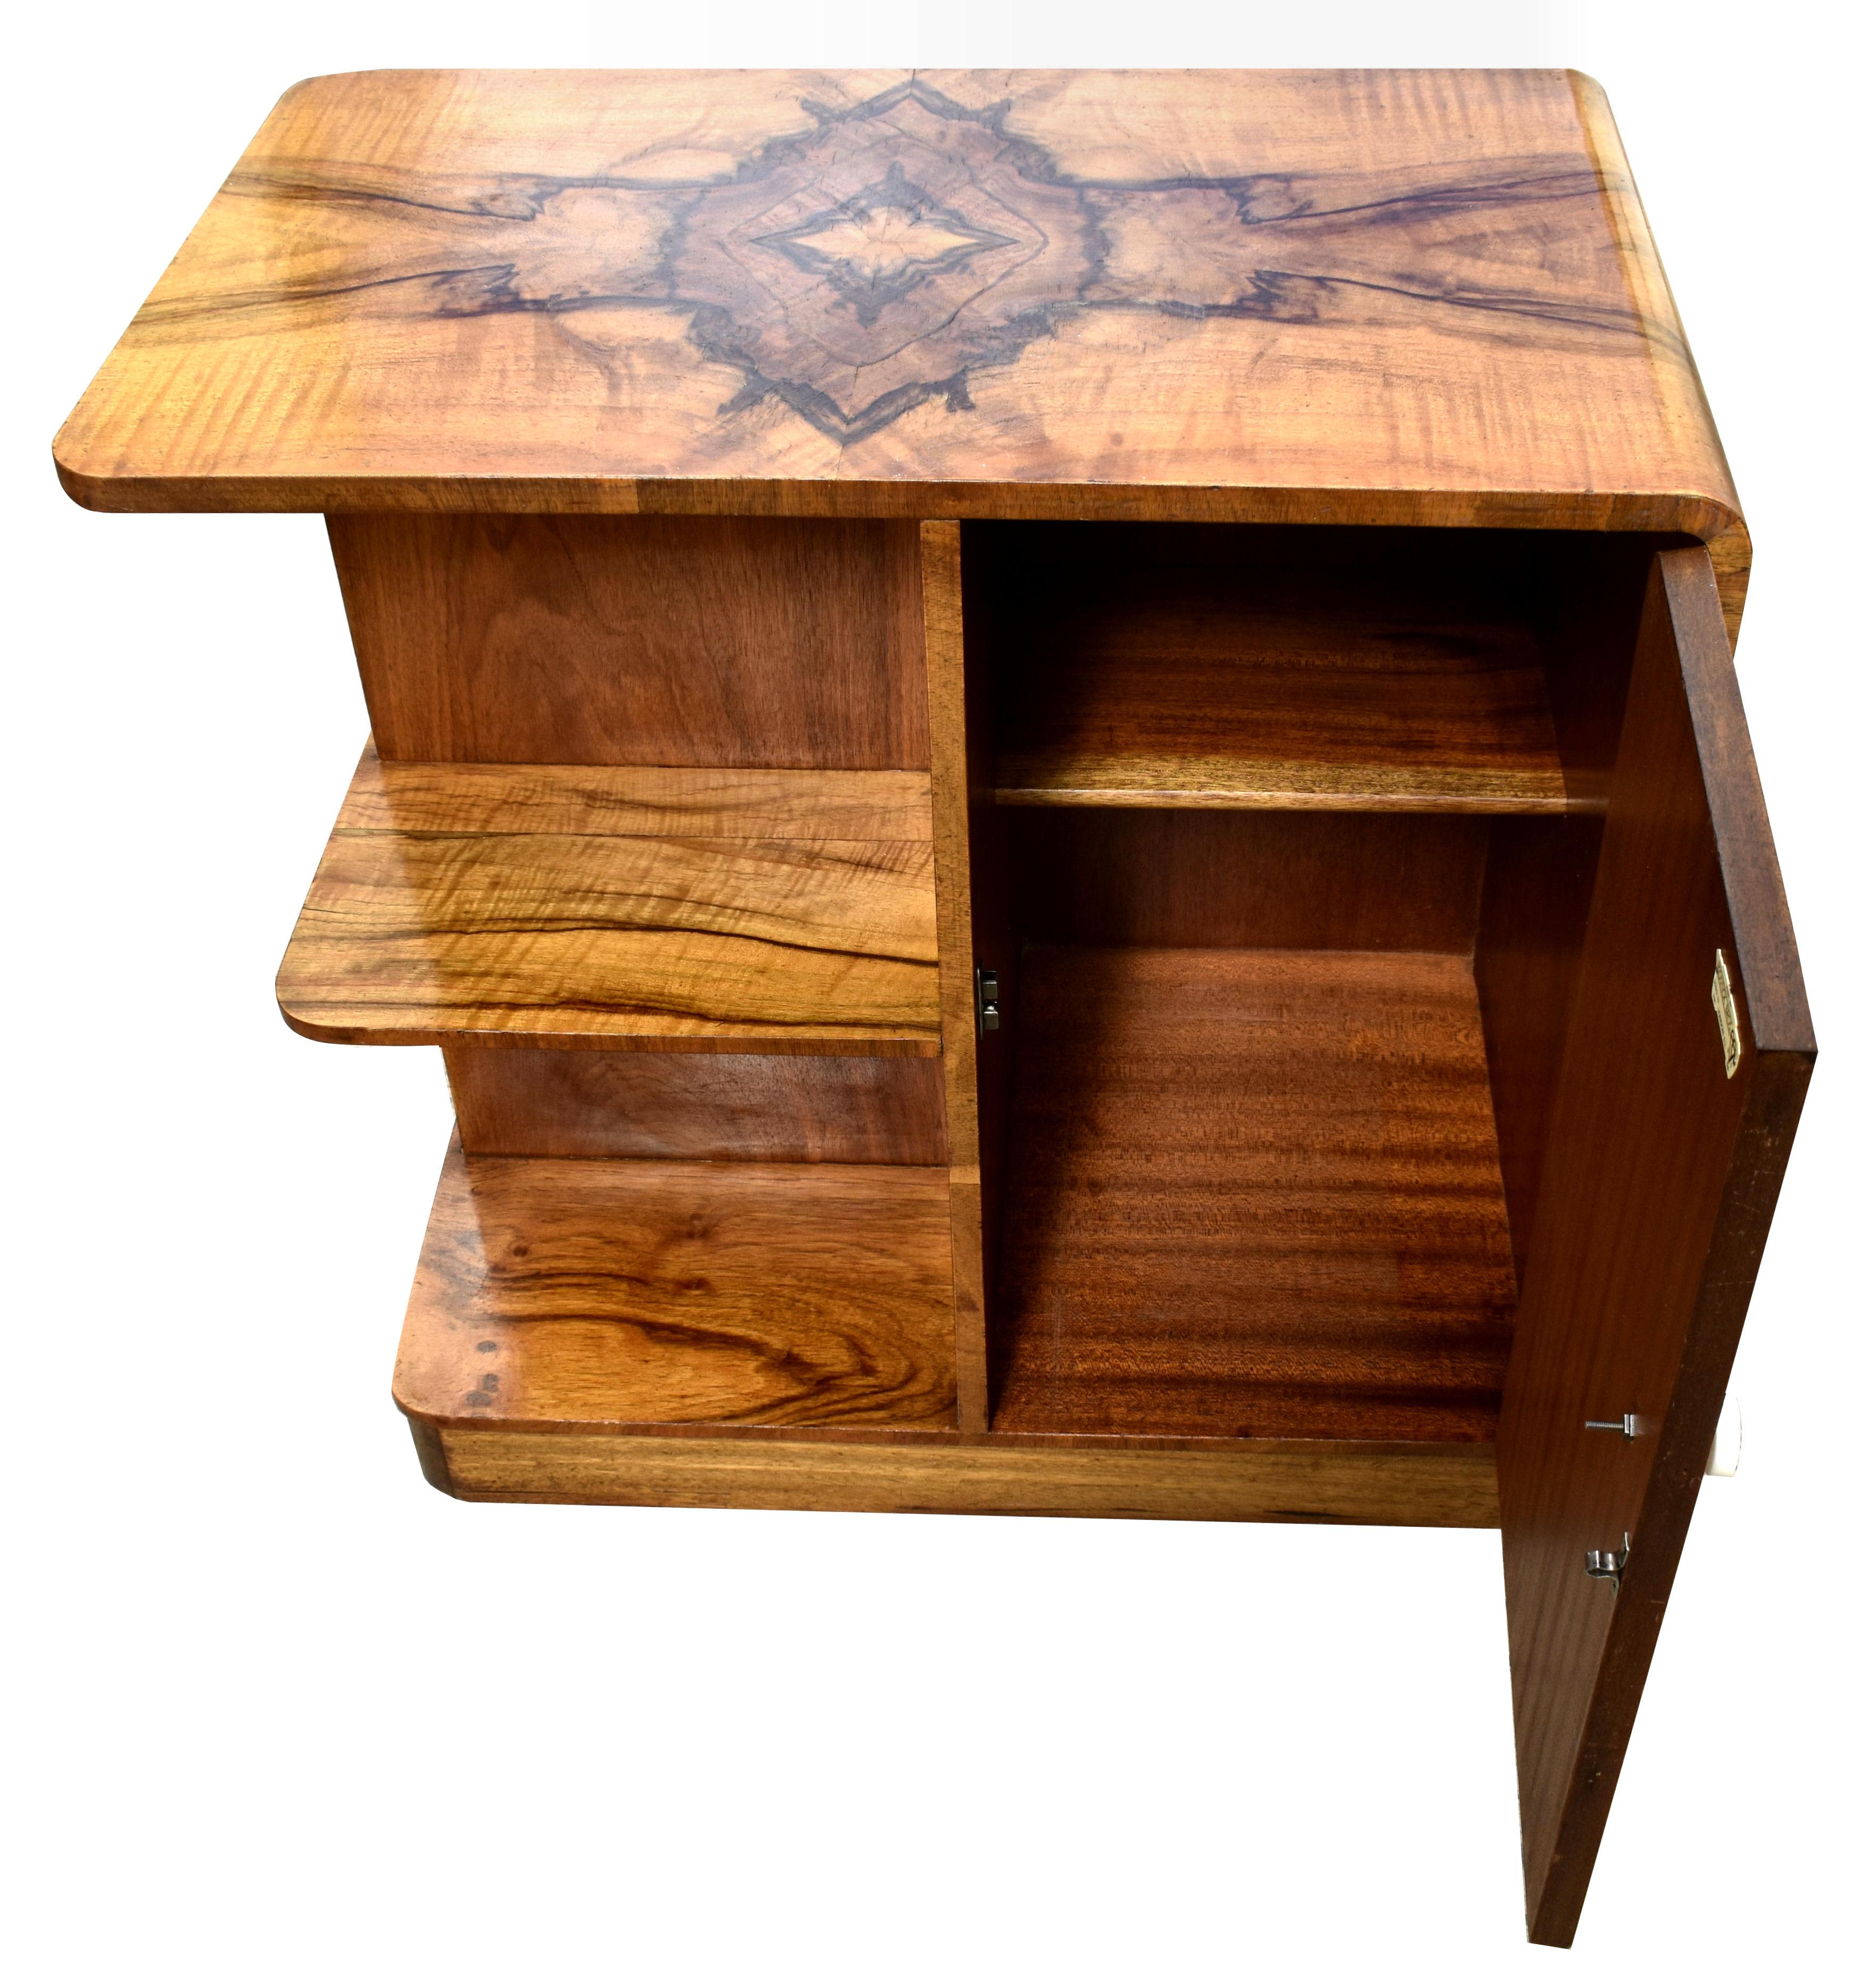 Stunning 1930s figured walnut Art Deco coffee/ book table. This is a really stylish period piece in fabulous condition with great figured walnut all-over, original Bakelite . Ideal size for displaying and storage with modern day use in mind. Very